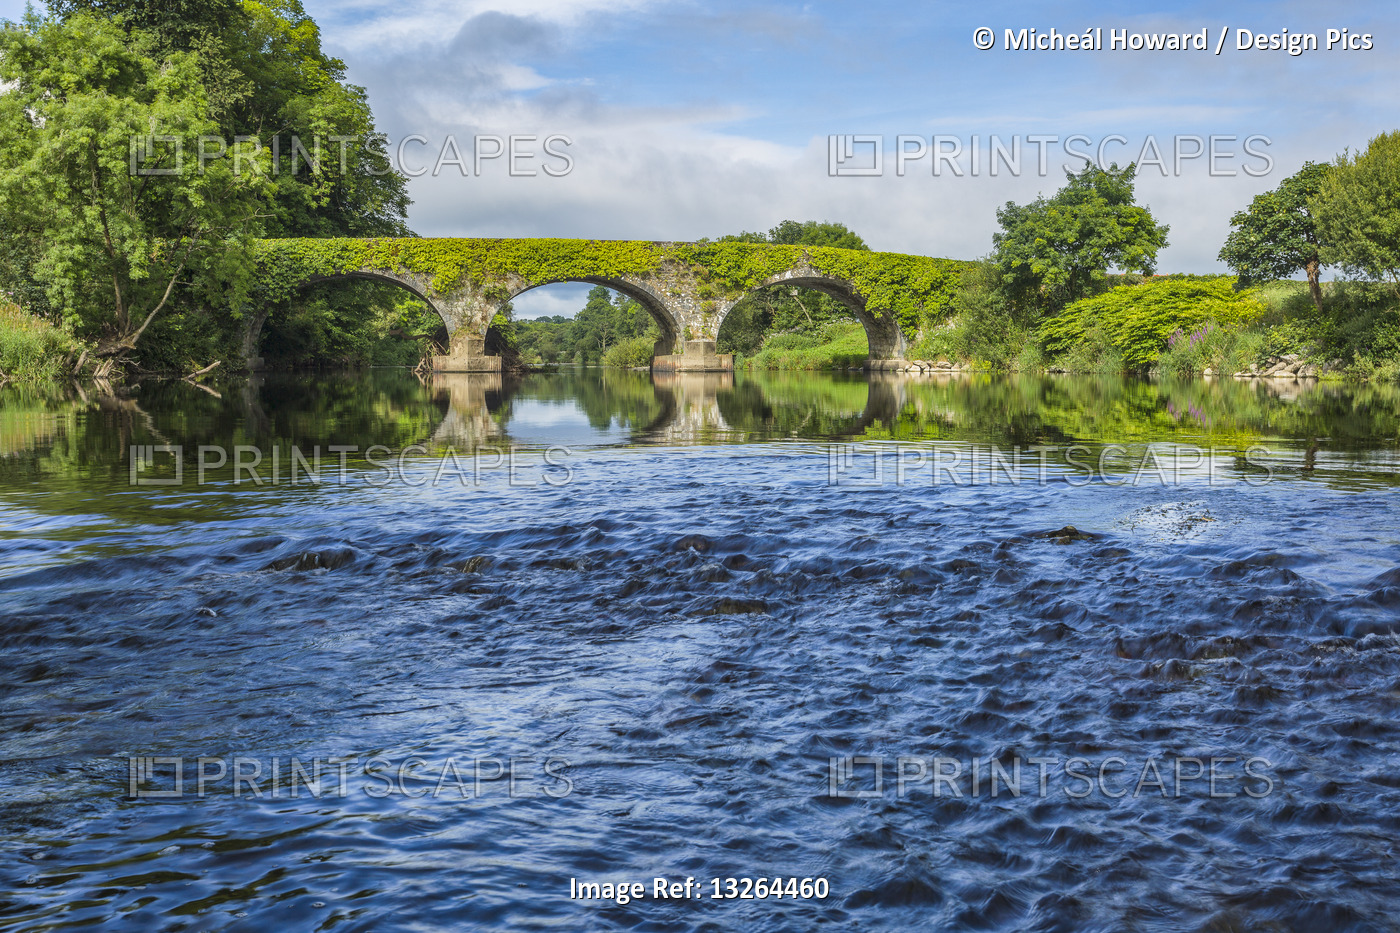 Small rapids on the Blackwater river with an old stone bridge in the background ...